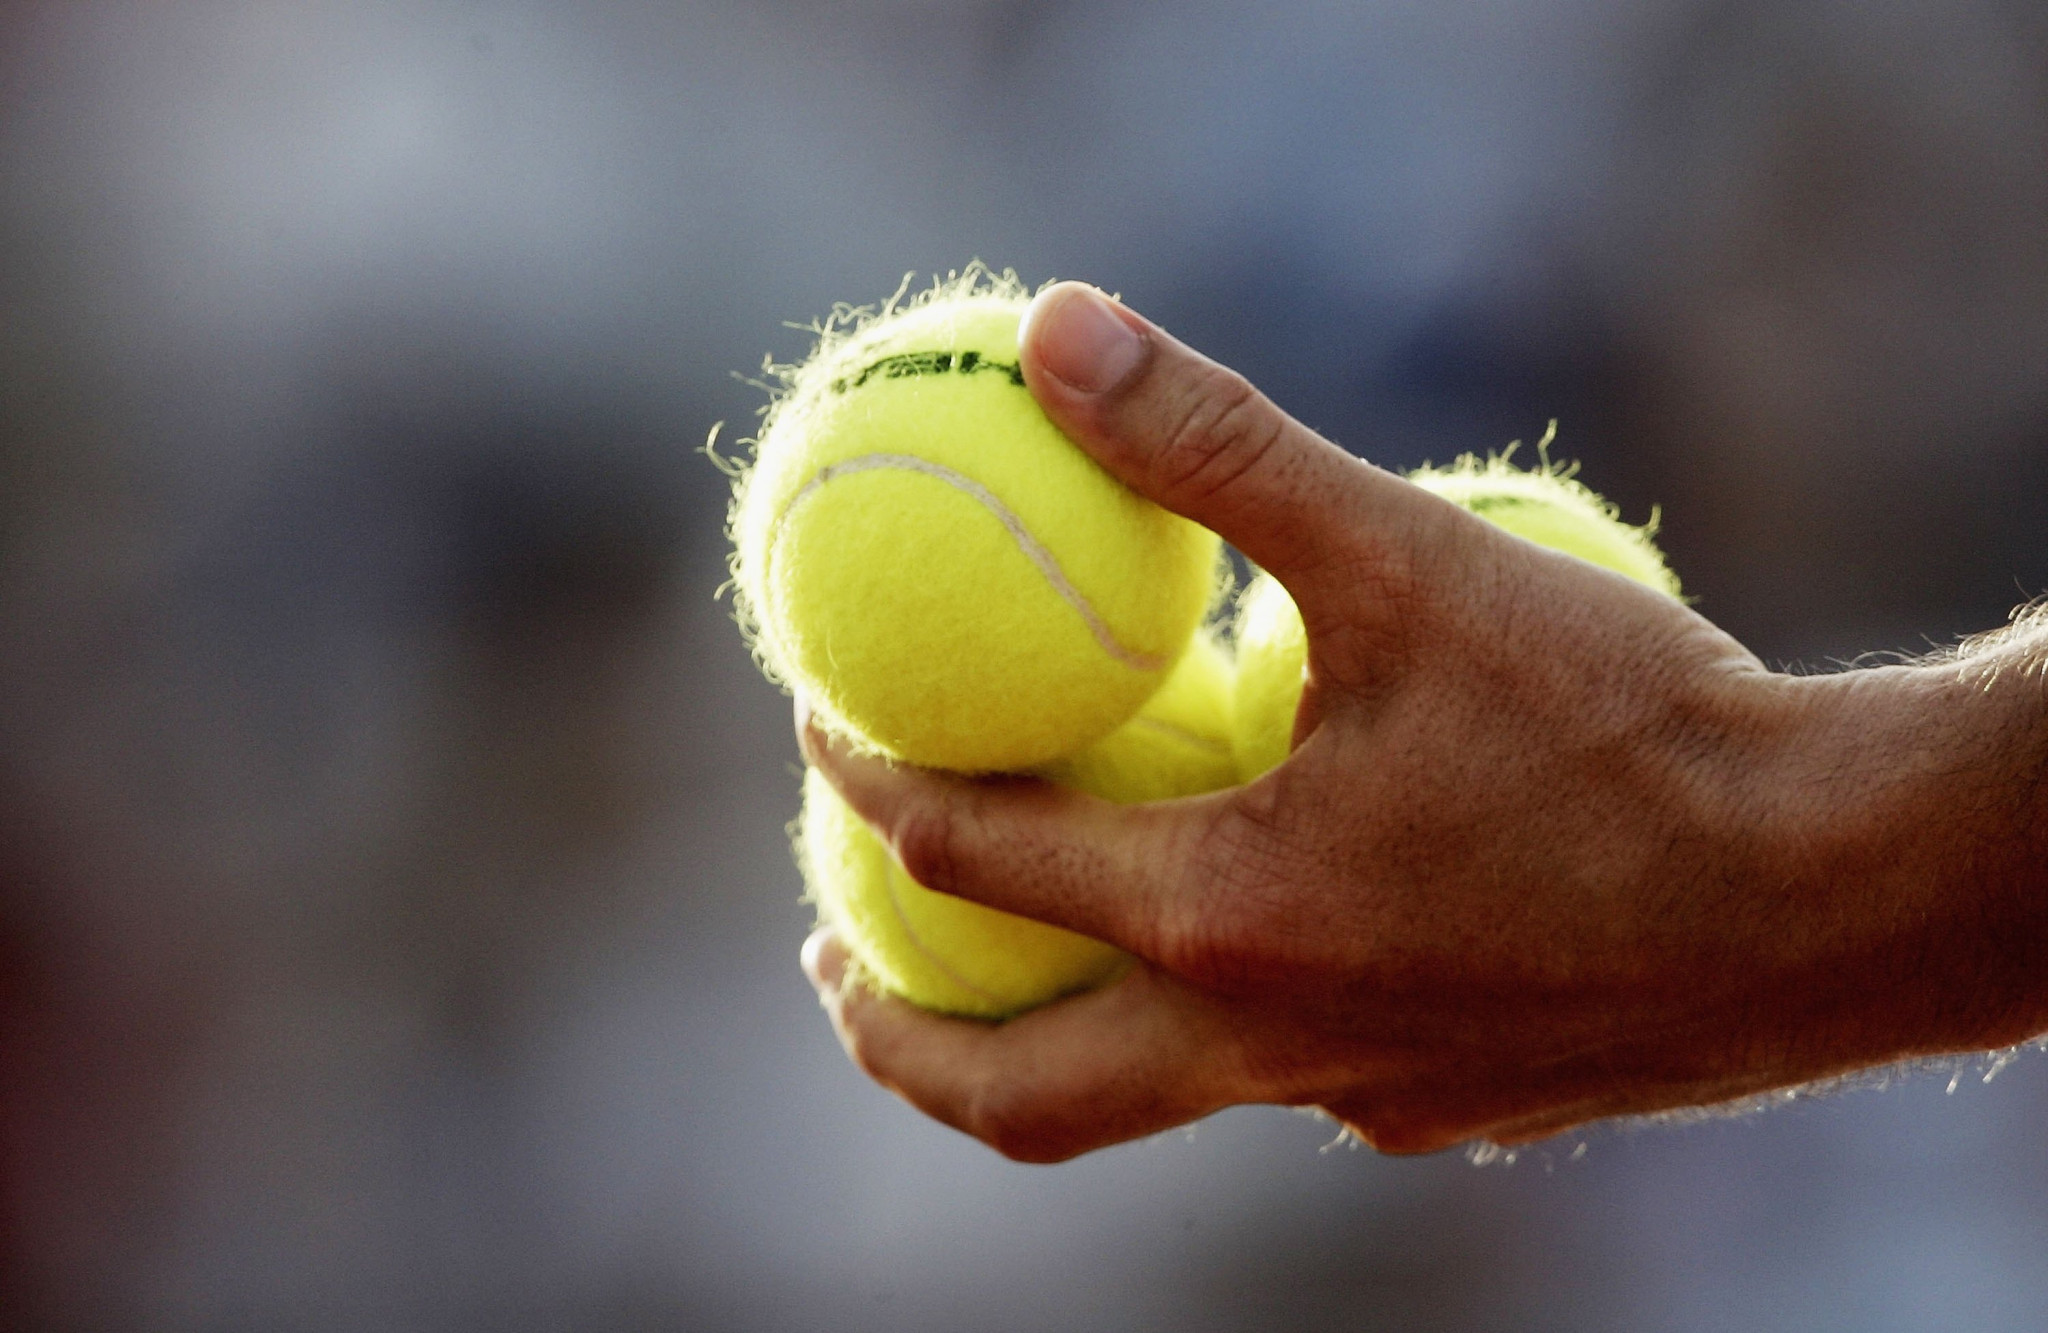 ITF vows further support for tennis stakeholders including players outside top 500